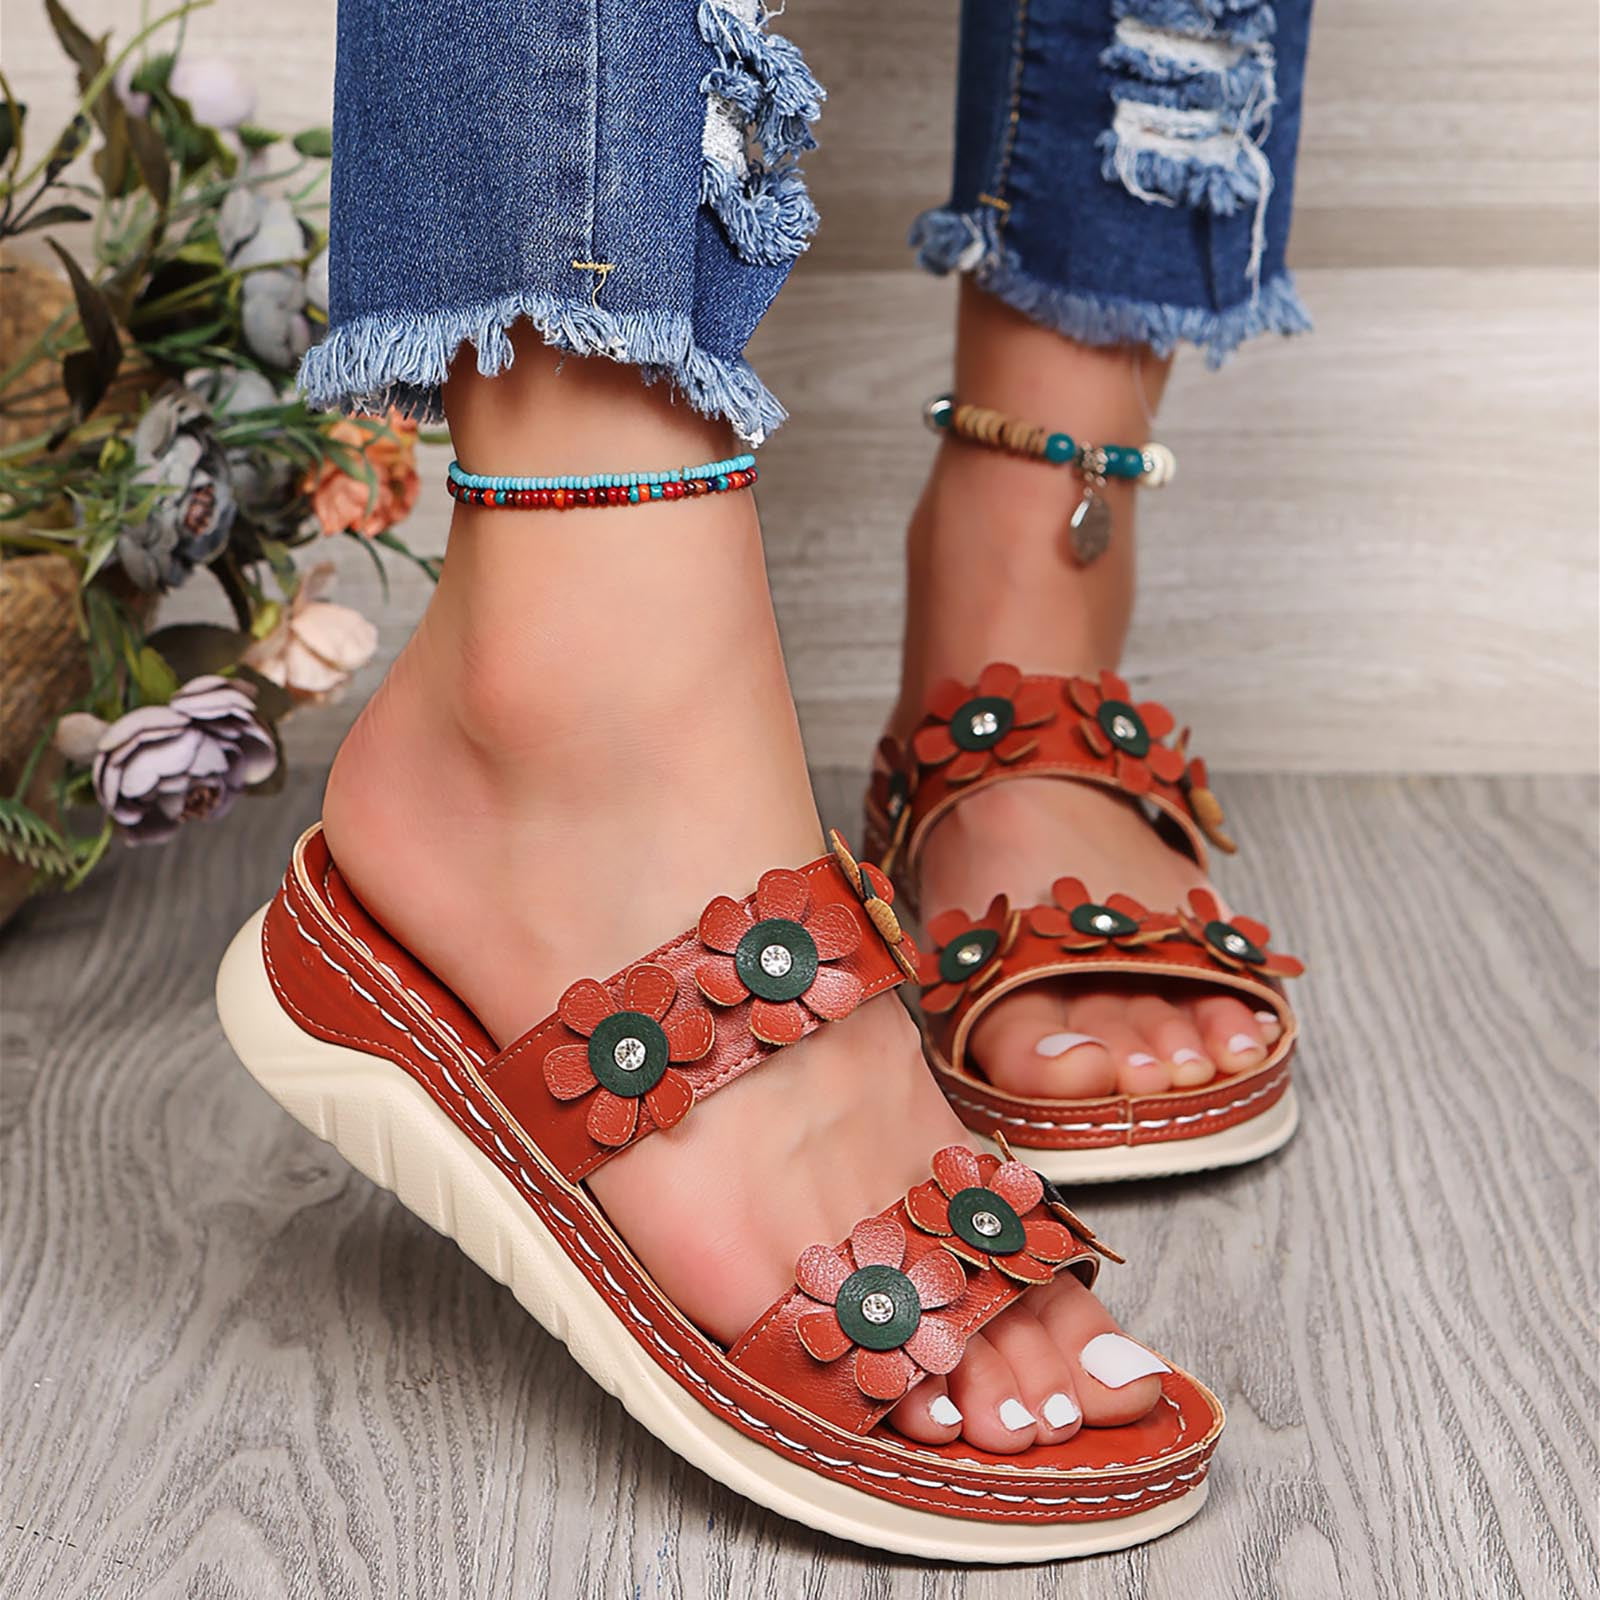 Gibobby Sandals for Women Platform,Womens Casual Round Toe Breathable Wedges Bowknot Hollow Out Walking Beach Shoes 